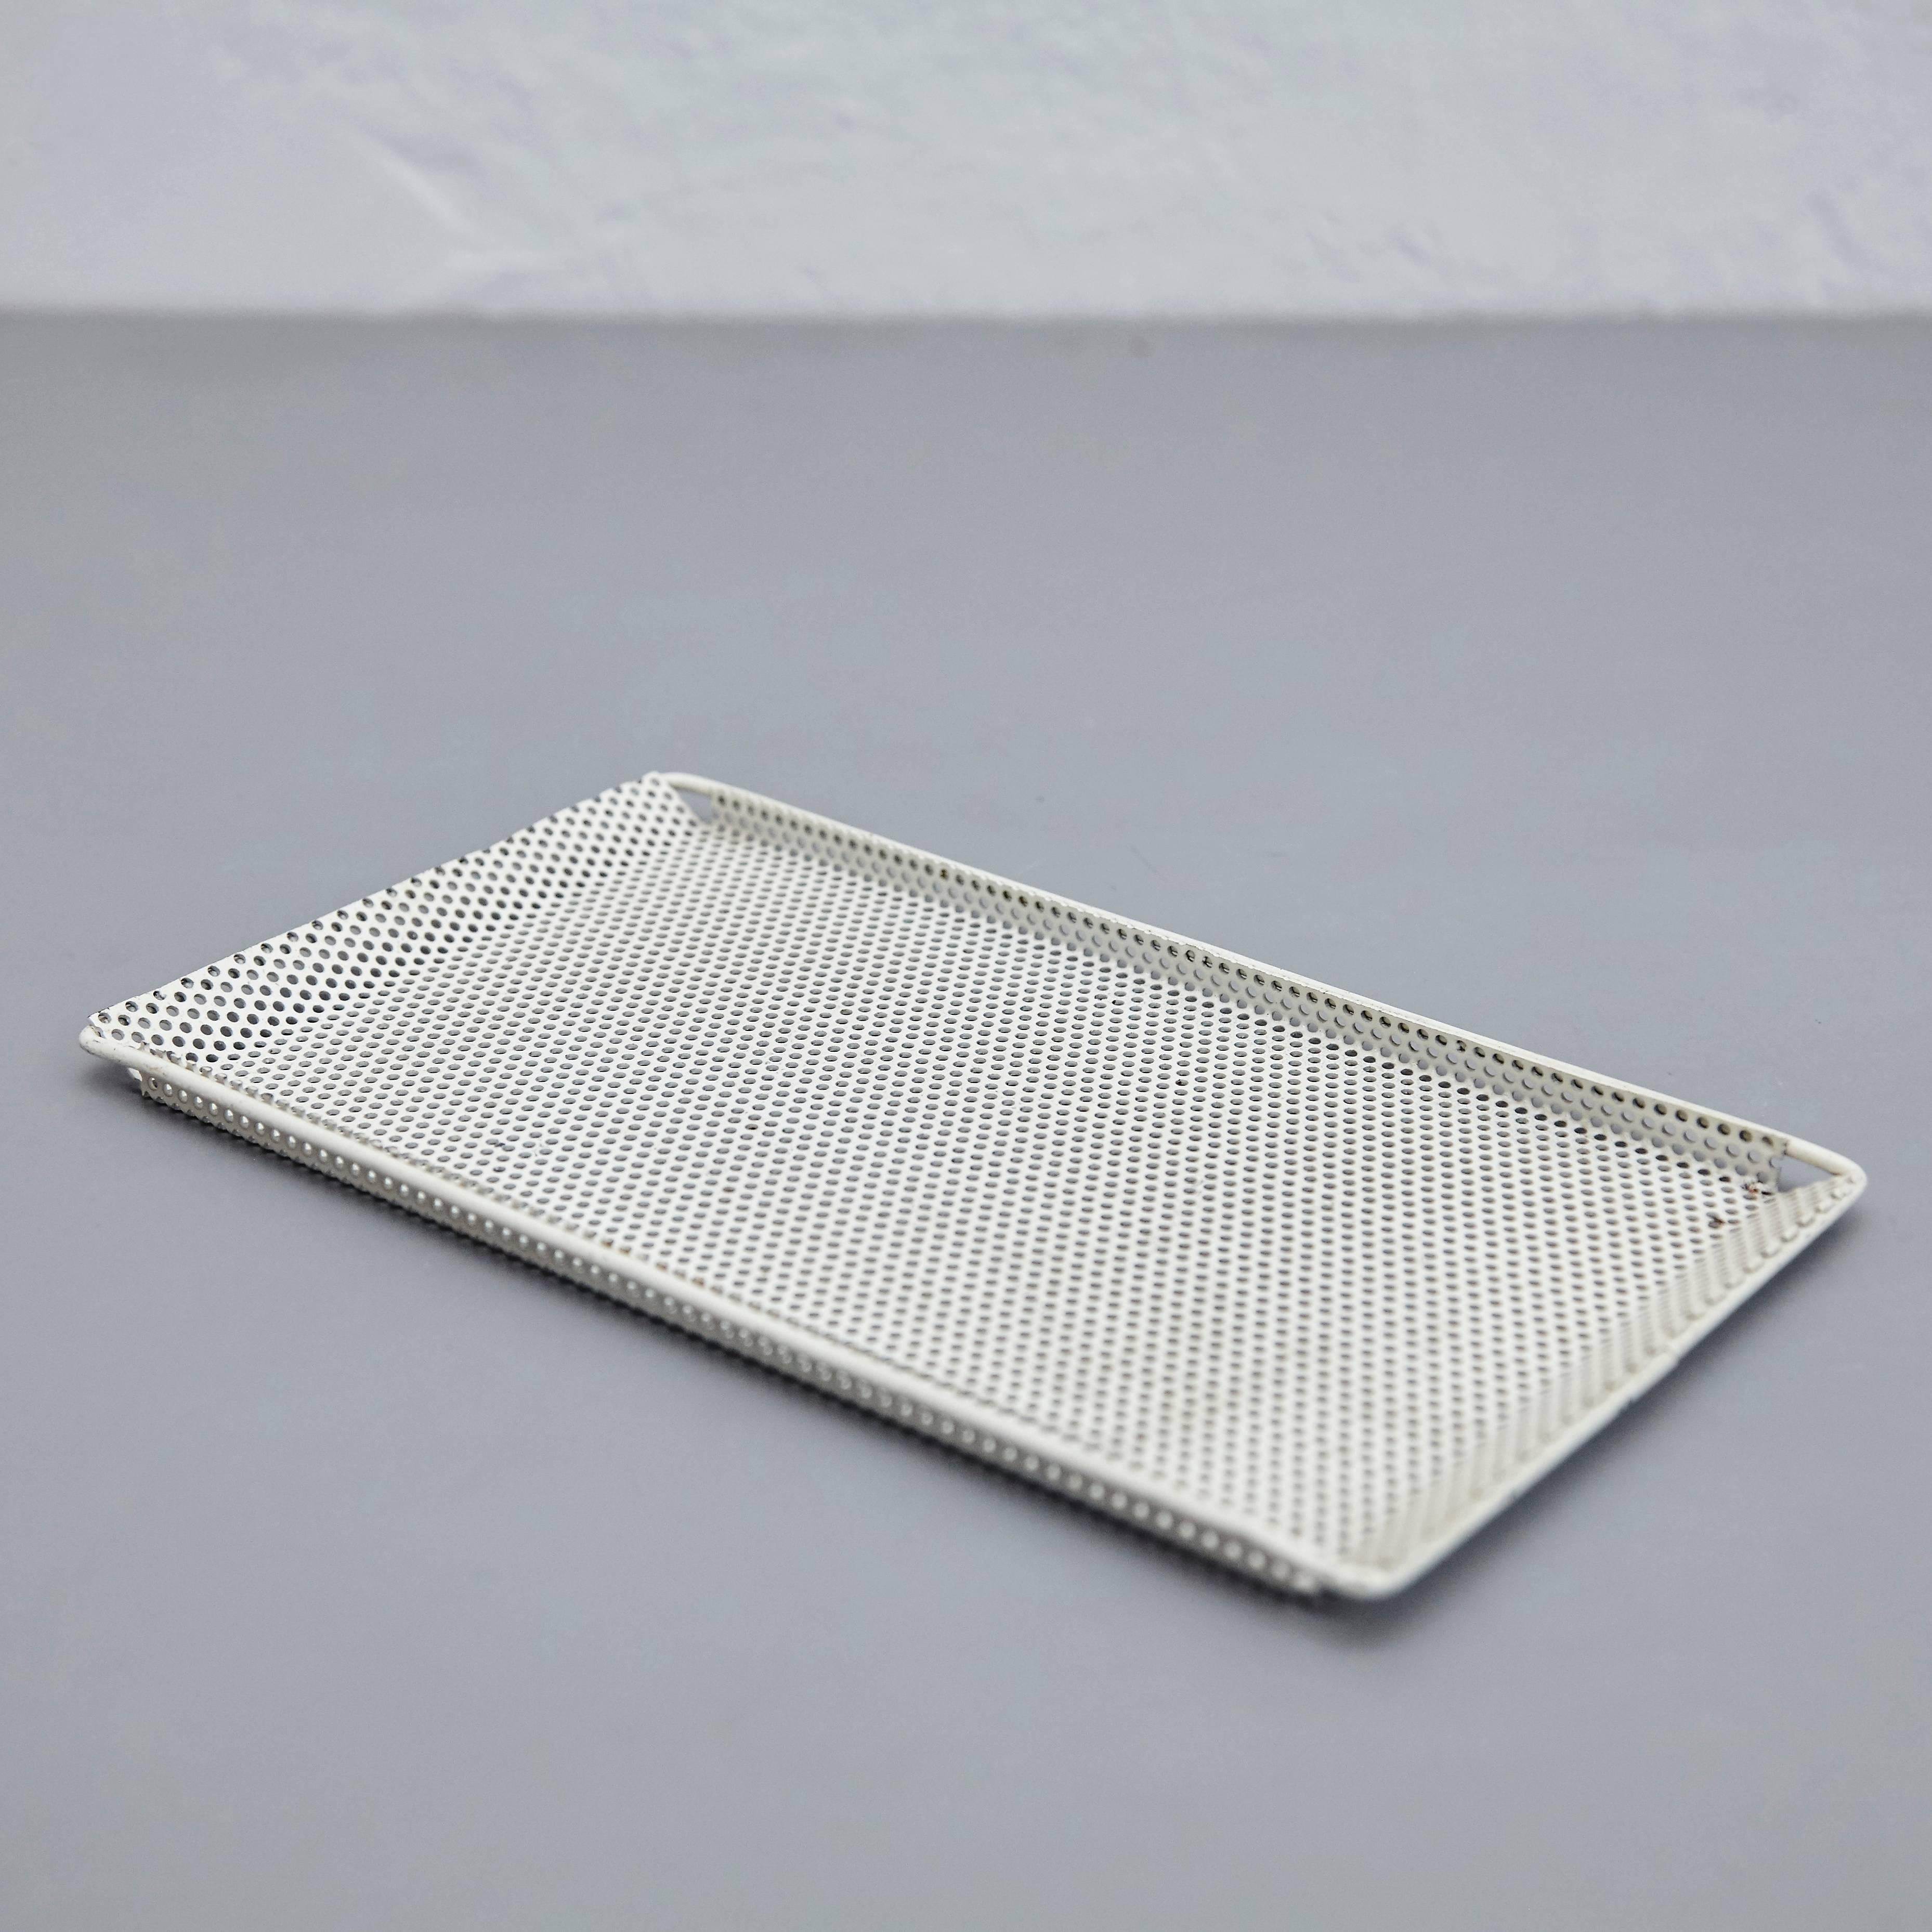 Enameled metal plate designed by Mathieu Matégot.
Manufactured by Artimeta (Holland), circa 1950.
Lacquered perforated metal with original paint.

In great original condition, with minor wear consistent with age and use, preserving a beautiful